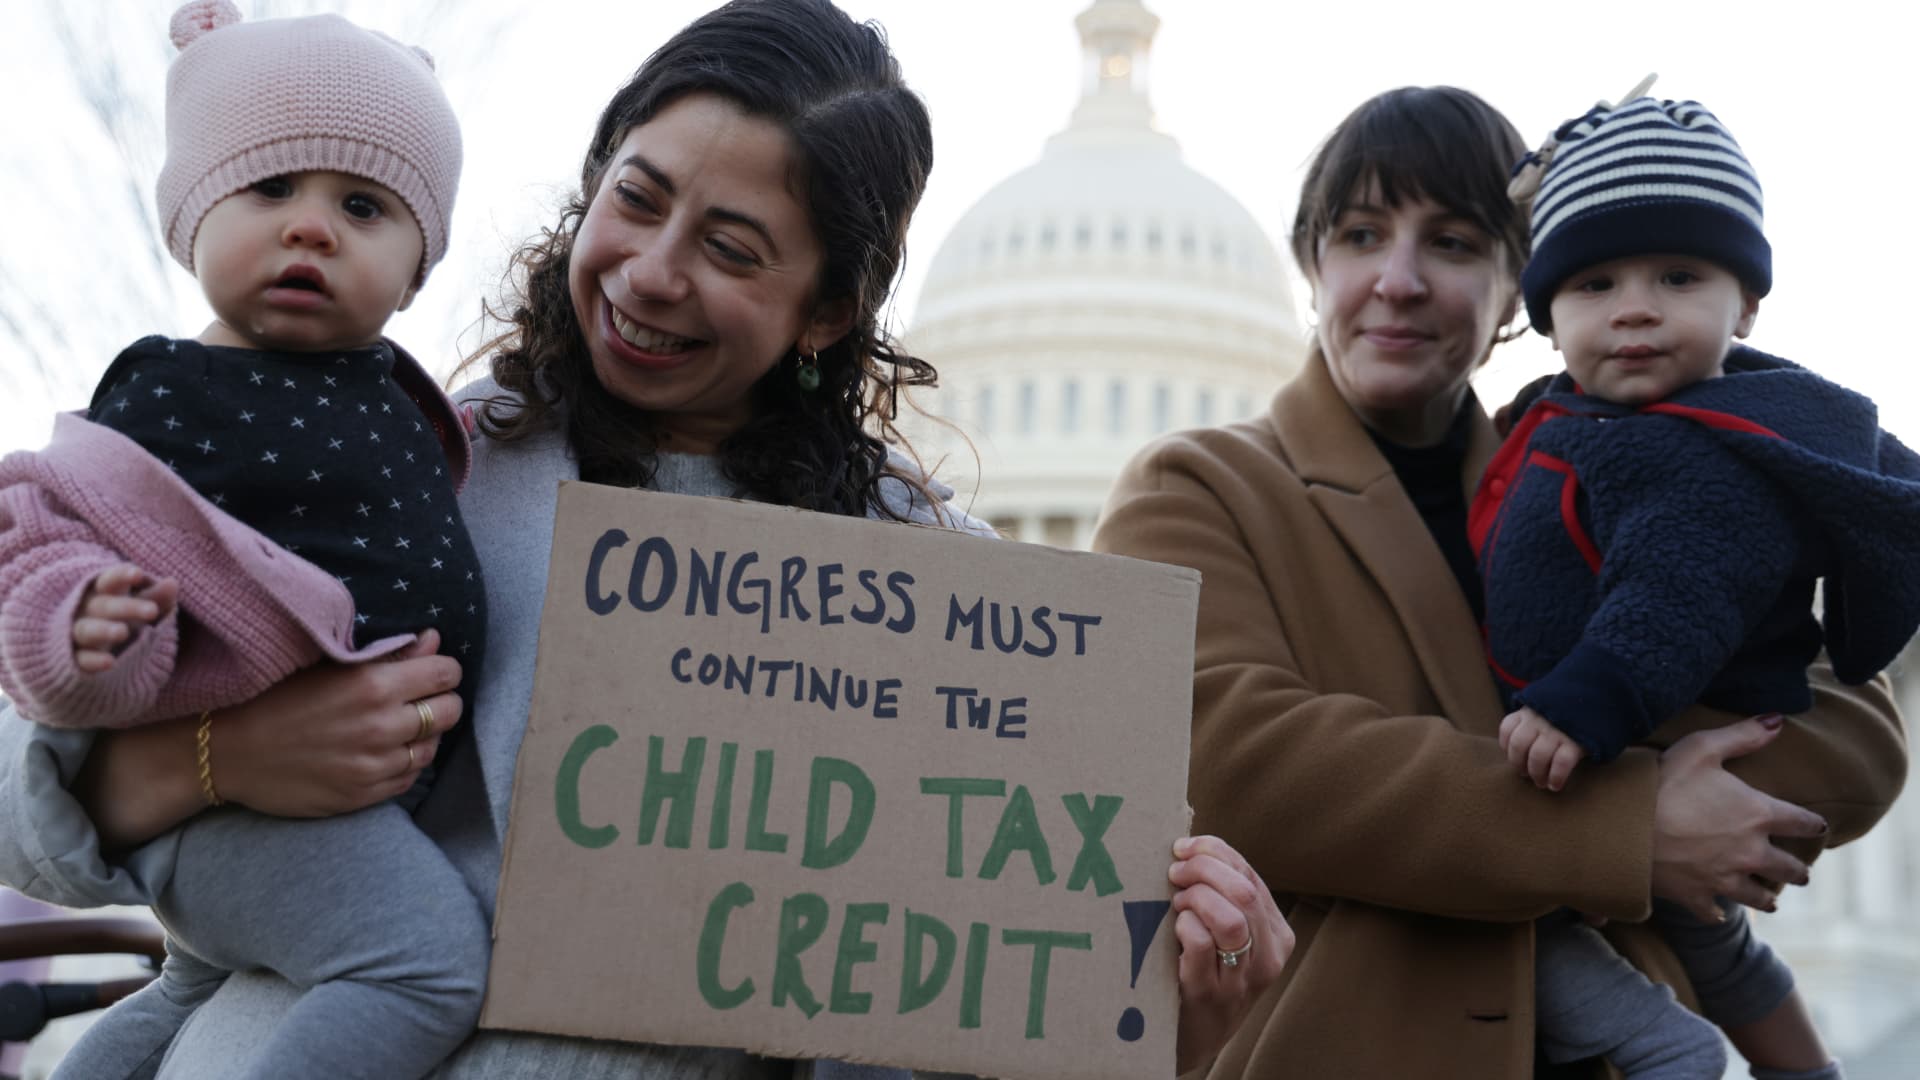 Washington, D.C.-area residents Cara Baldari and her 9-month-old daughter Evie (left) and Sarah Orrin-Vipond and her 8-month-old son Otto (right), join a rally in front of the U.S. Capitol on Dec. 13, 2021.